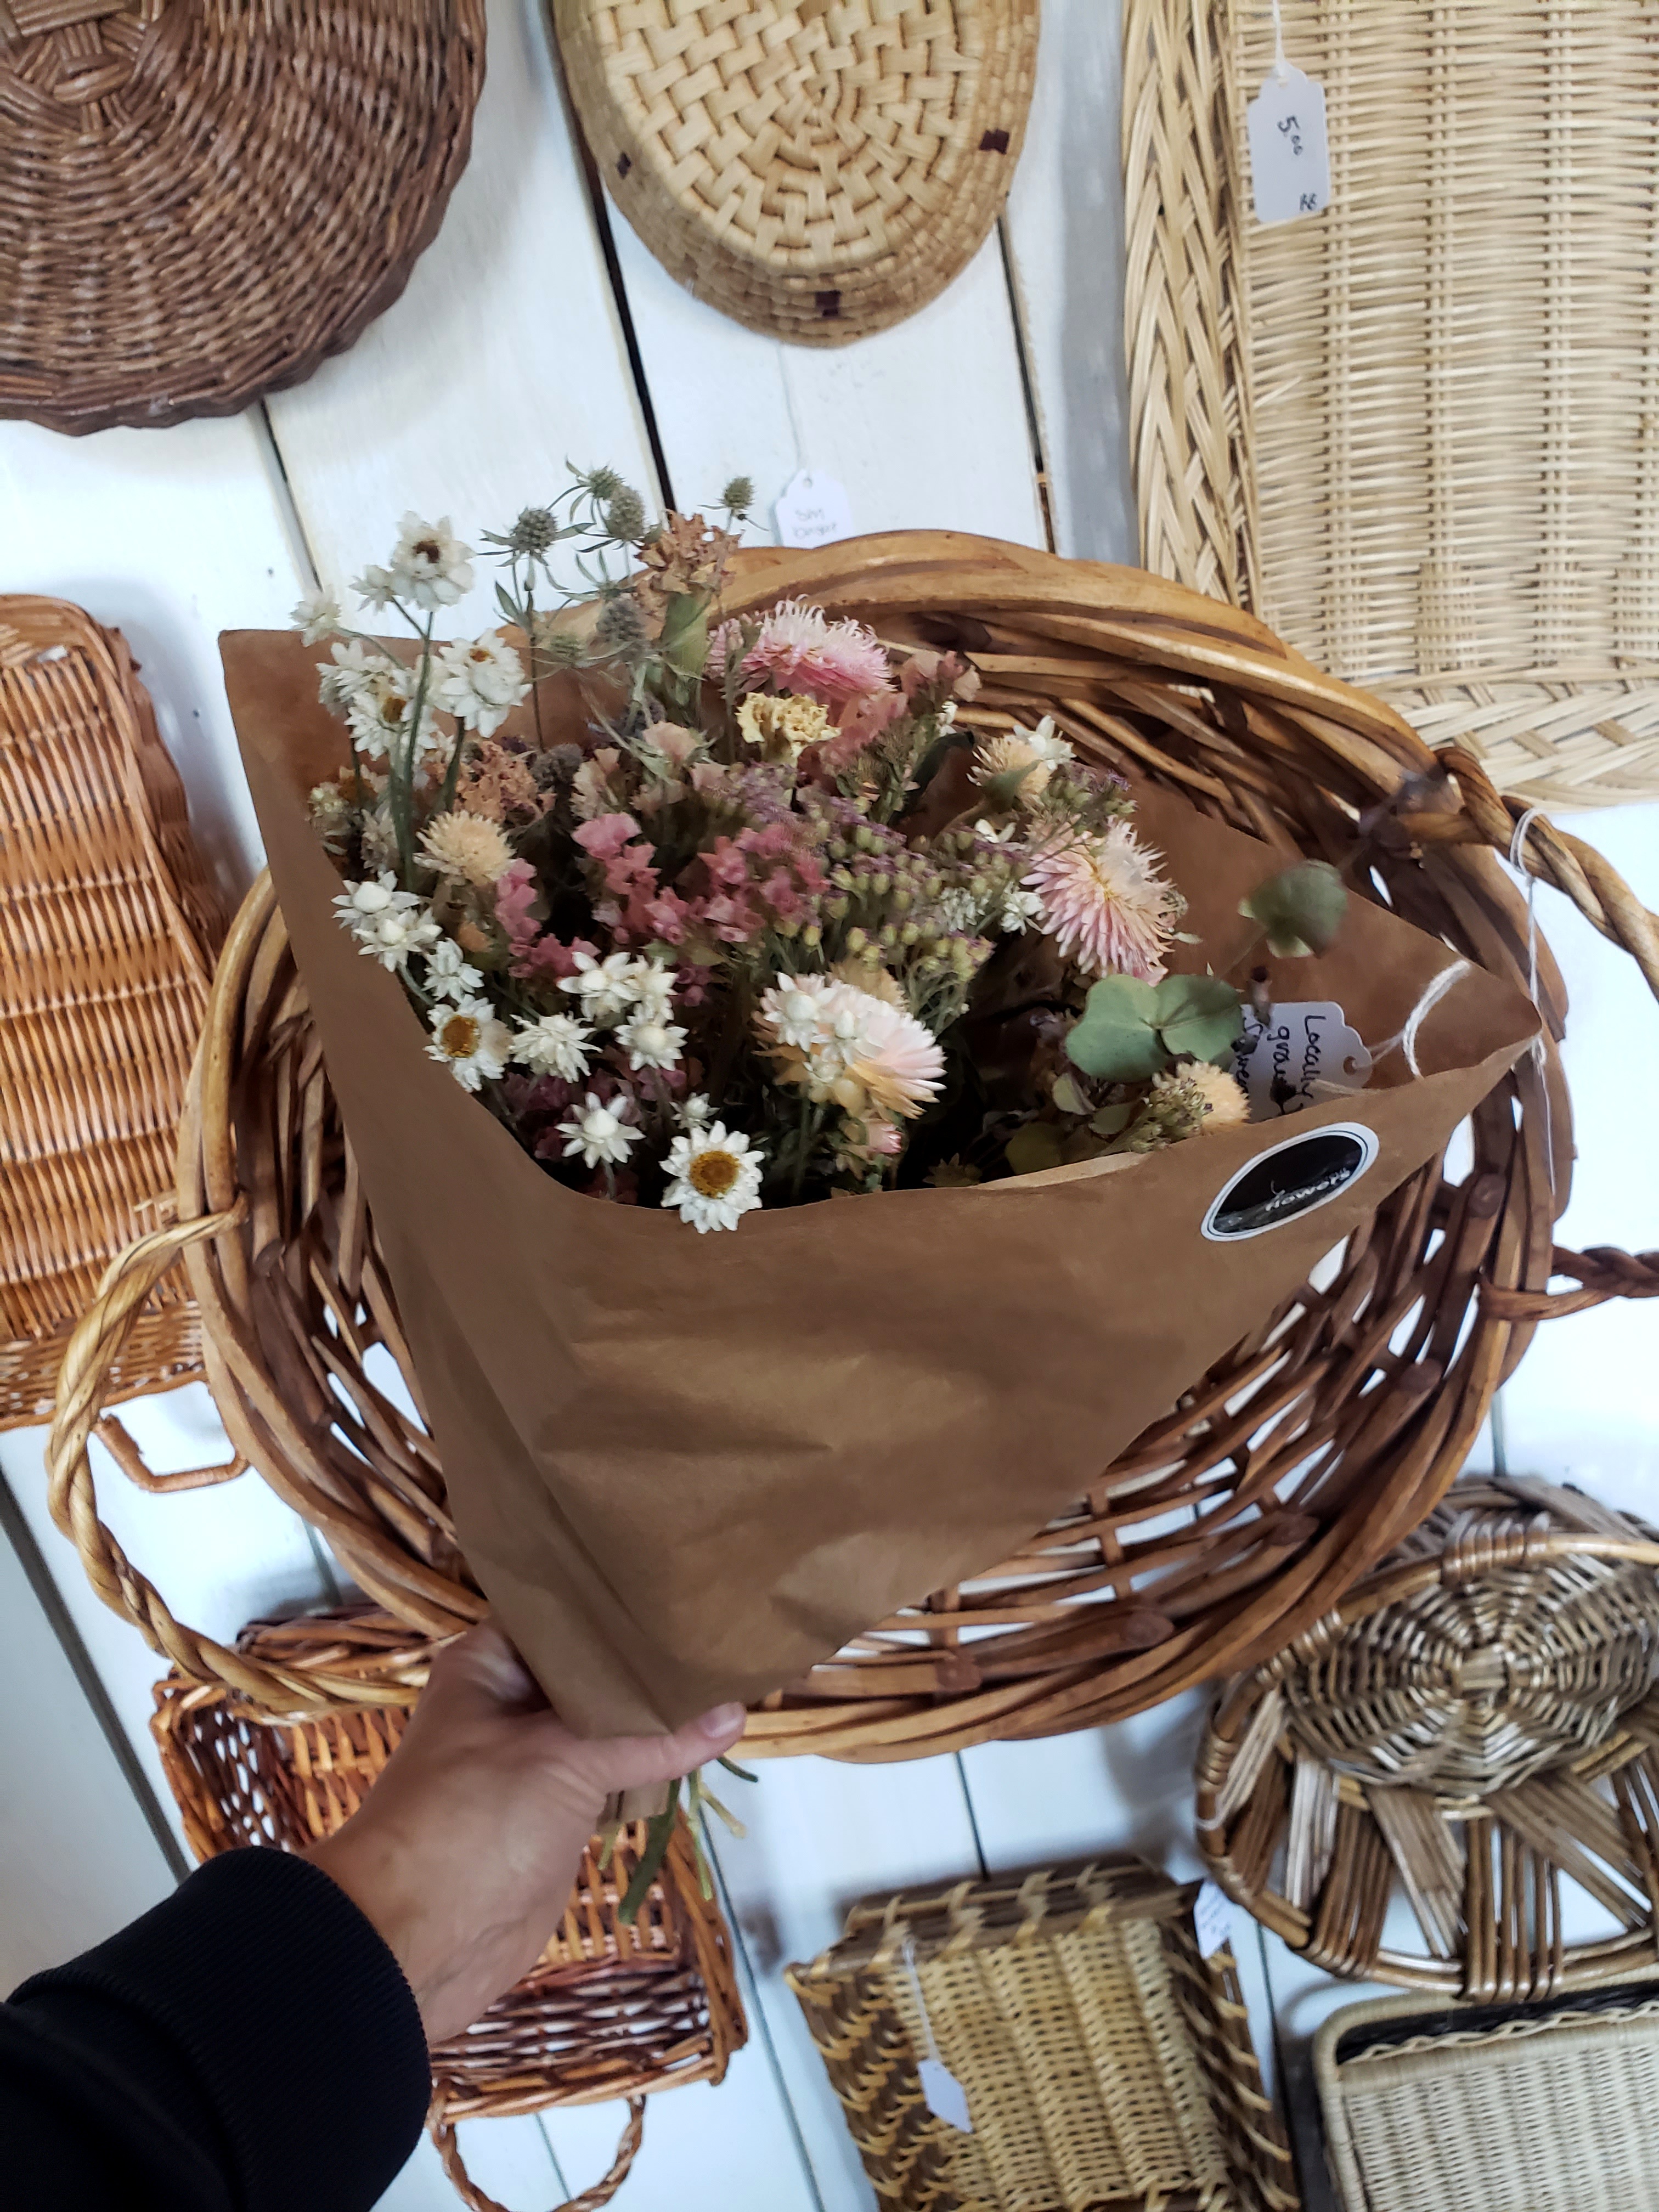 Holding a dried flower bouquet